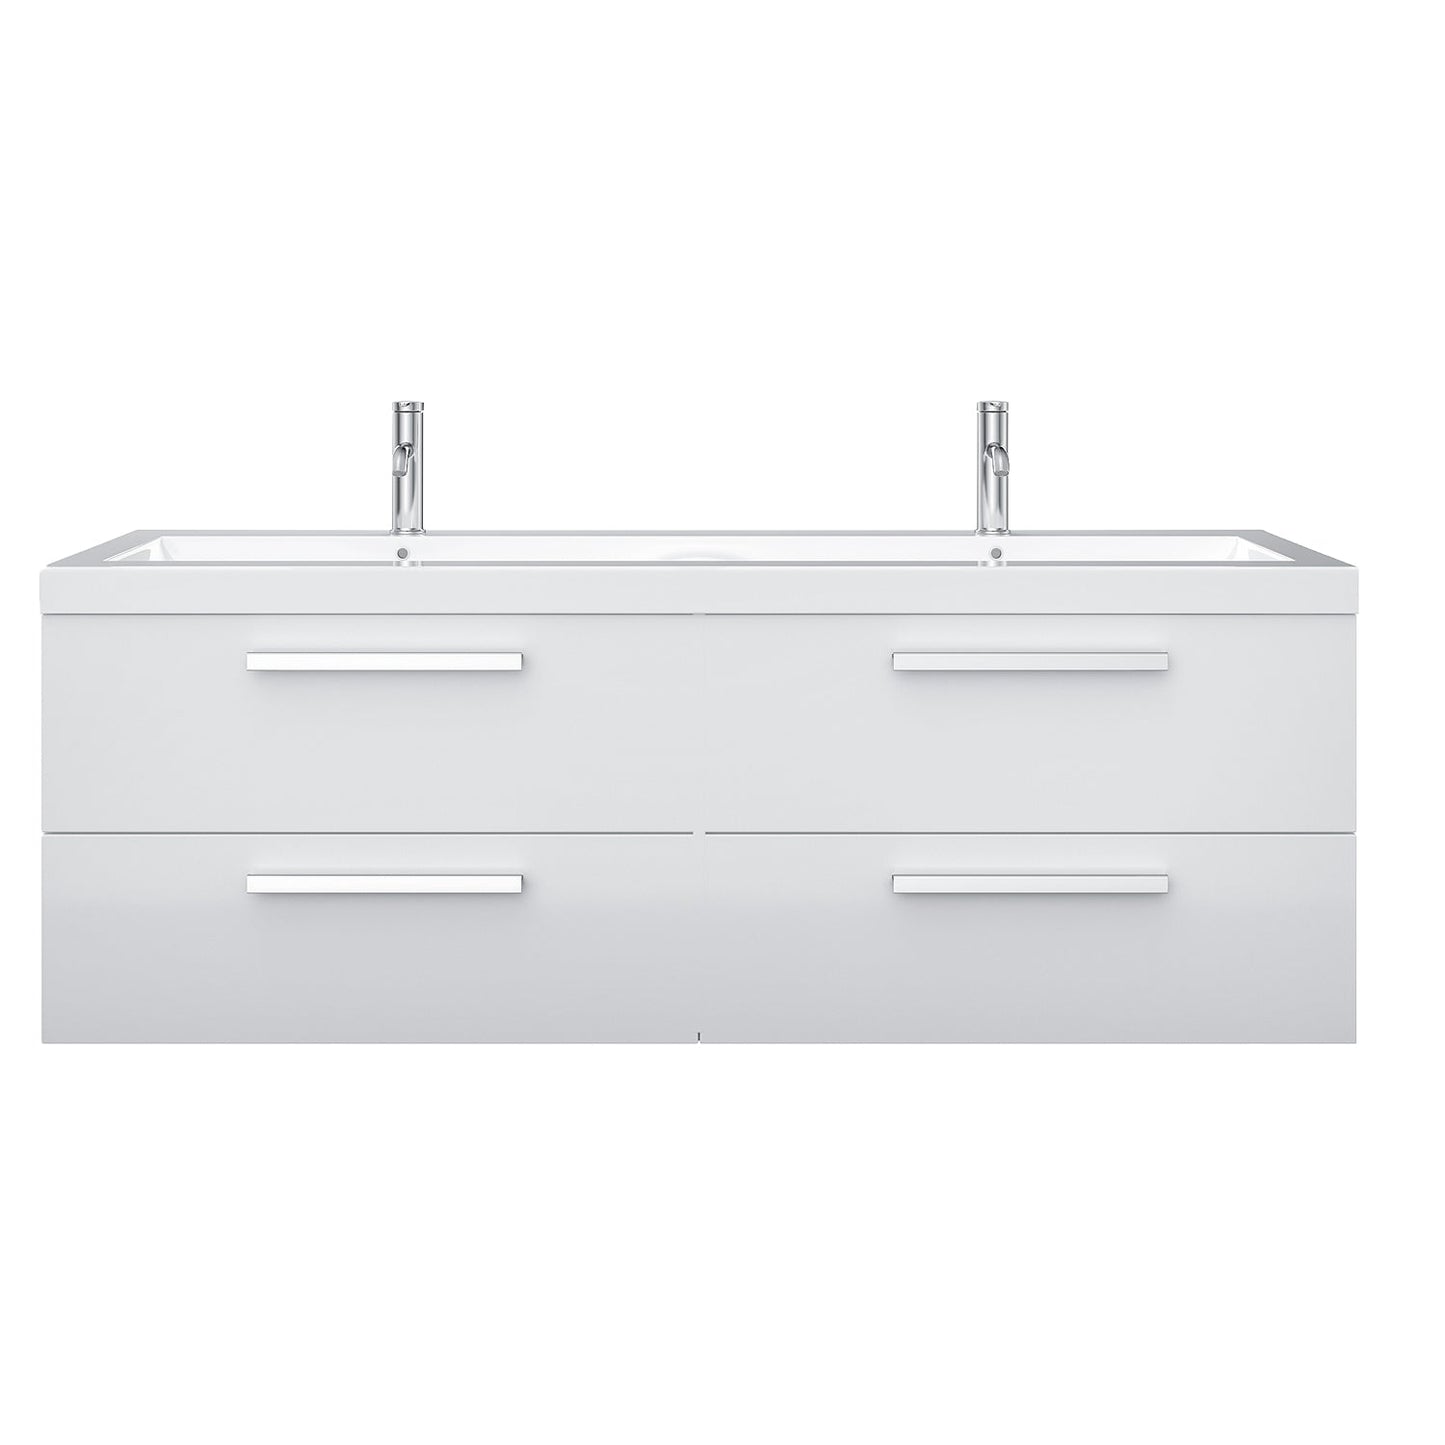 Eviva Surf 57" White Modern Bathroom Vanity Set with Integrated White Acrylic Double Sink